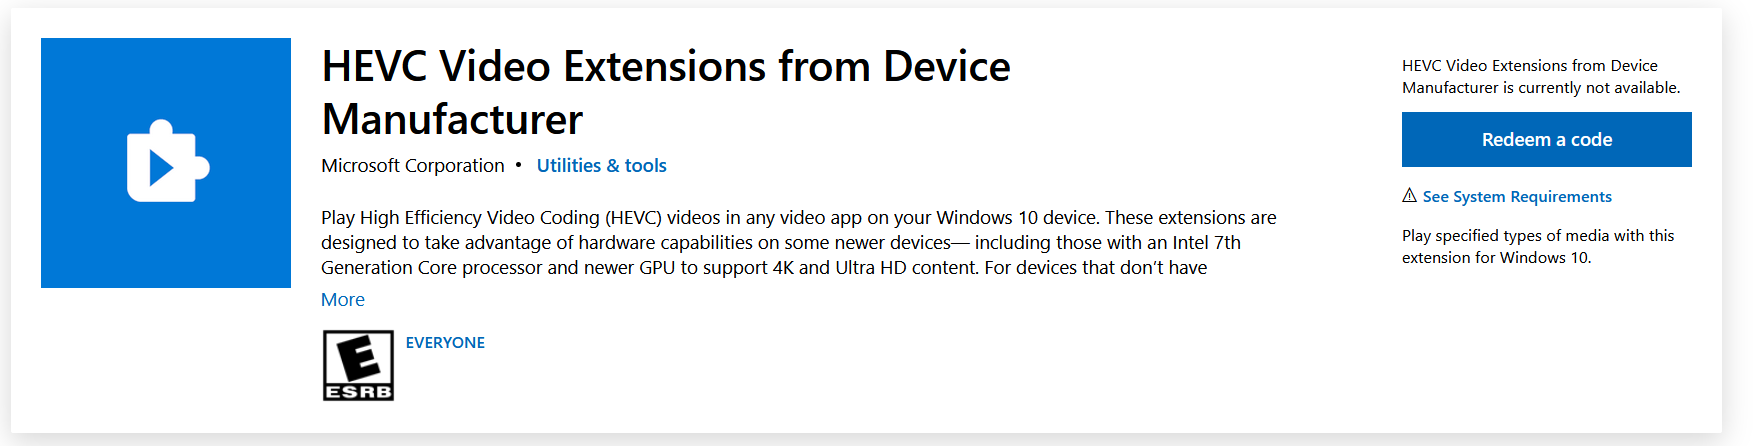 HEVC Video Extensions download the new version for apple